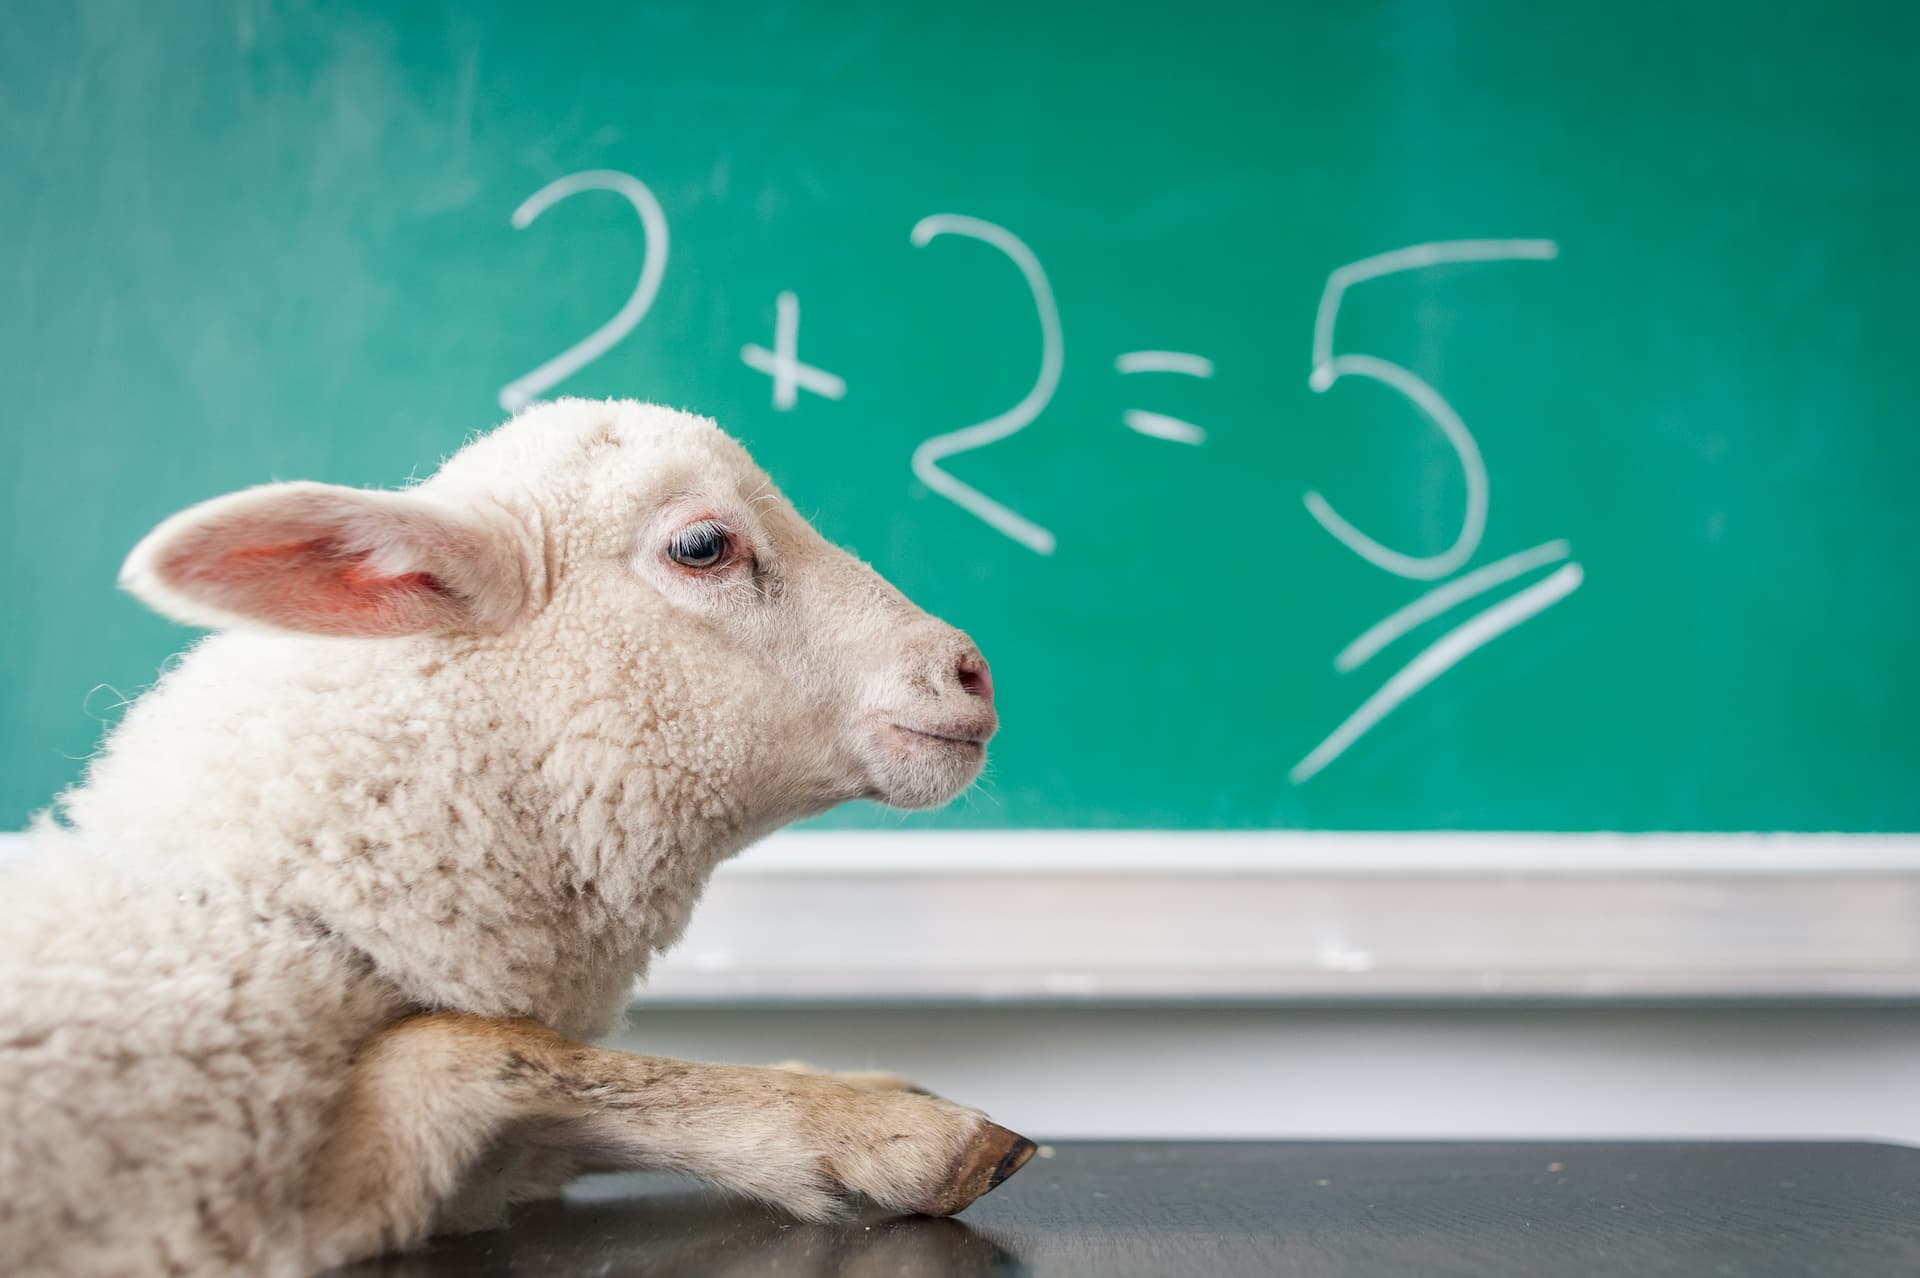 A sheep in front of a chalkboard where 2 + 2 = 5 is written.